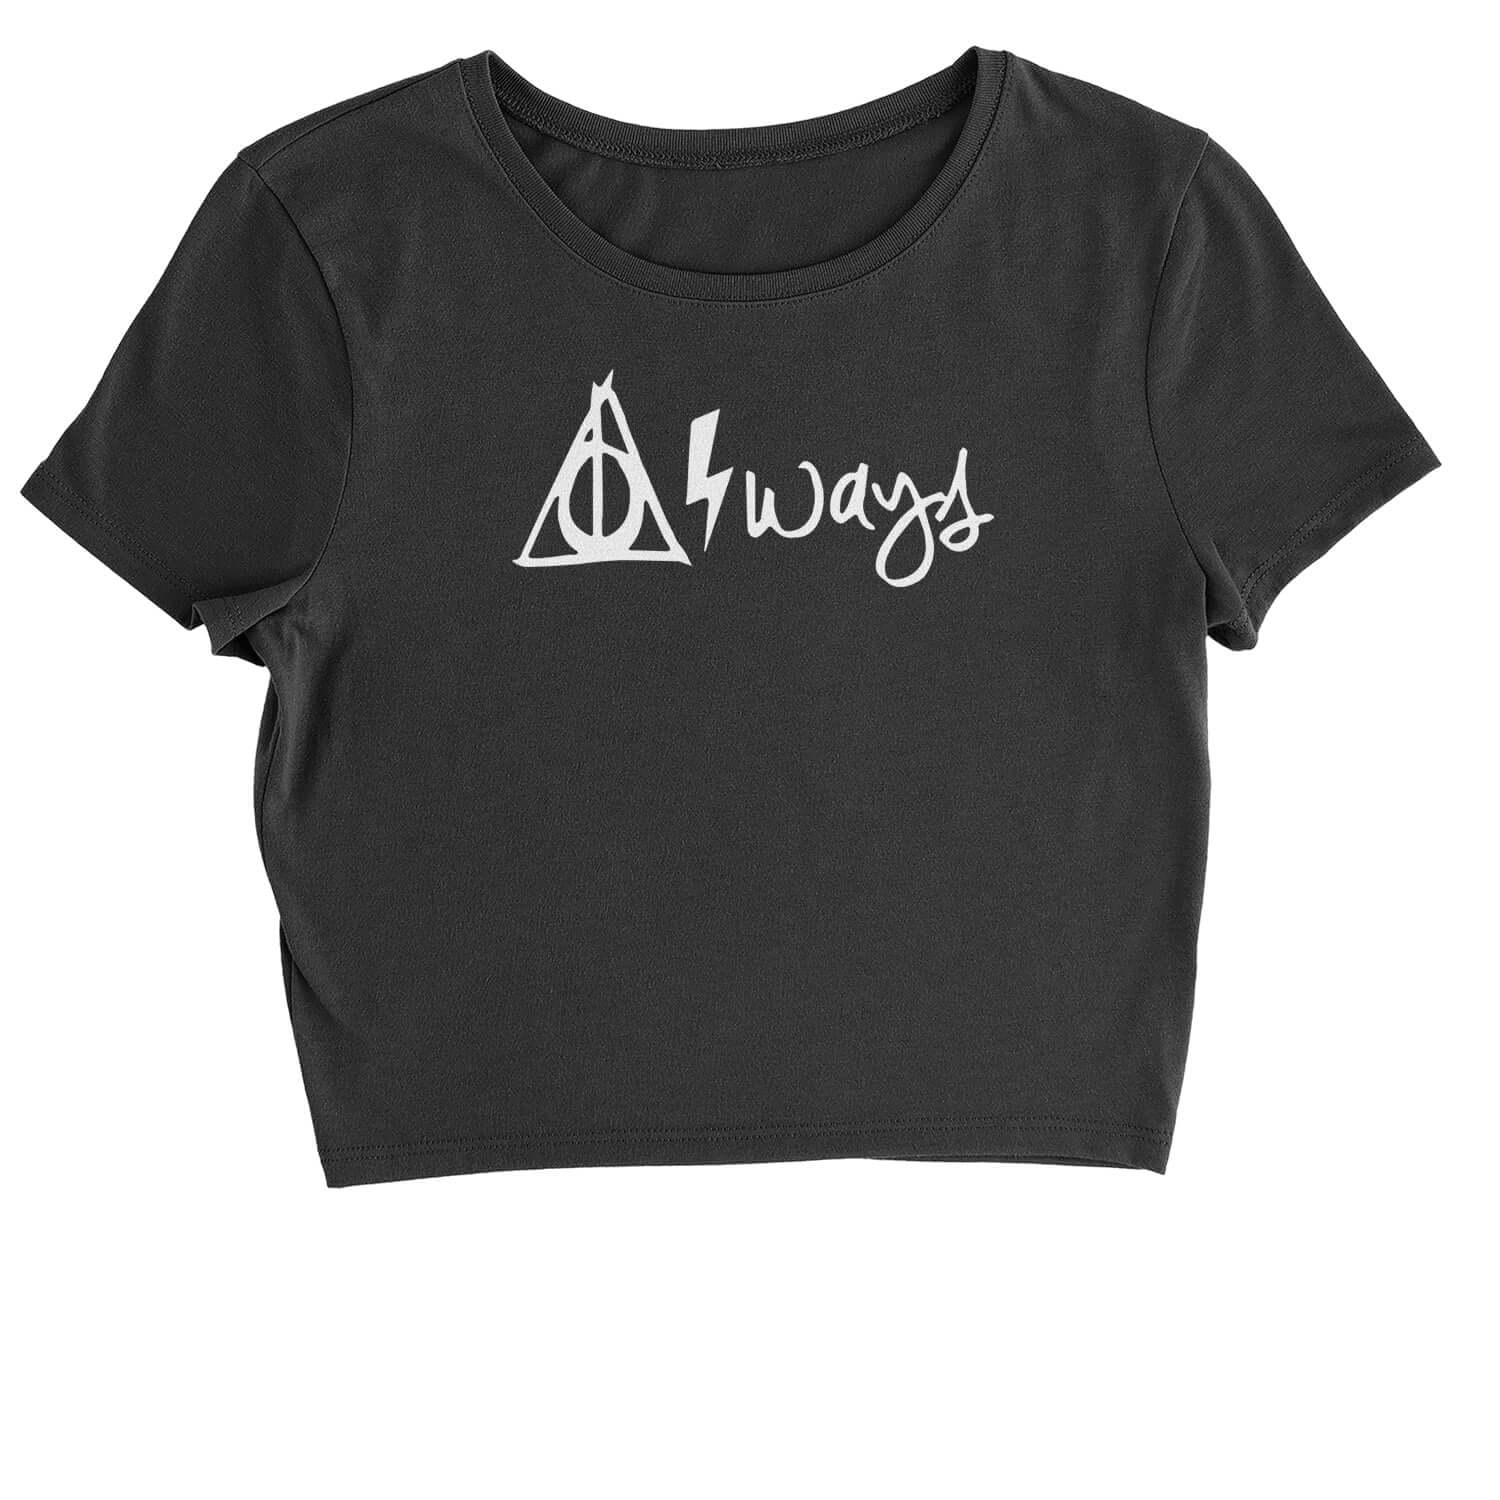 Always Lightning Bolt Cropped T-Shirt #expressiontees by Expression Tees